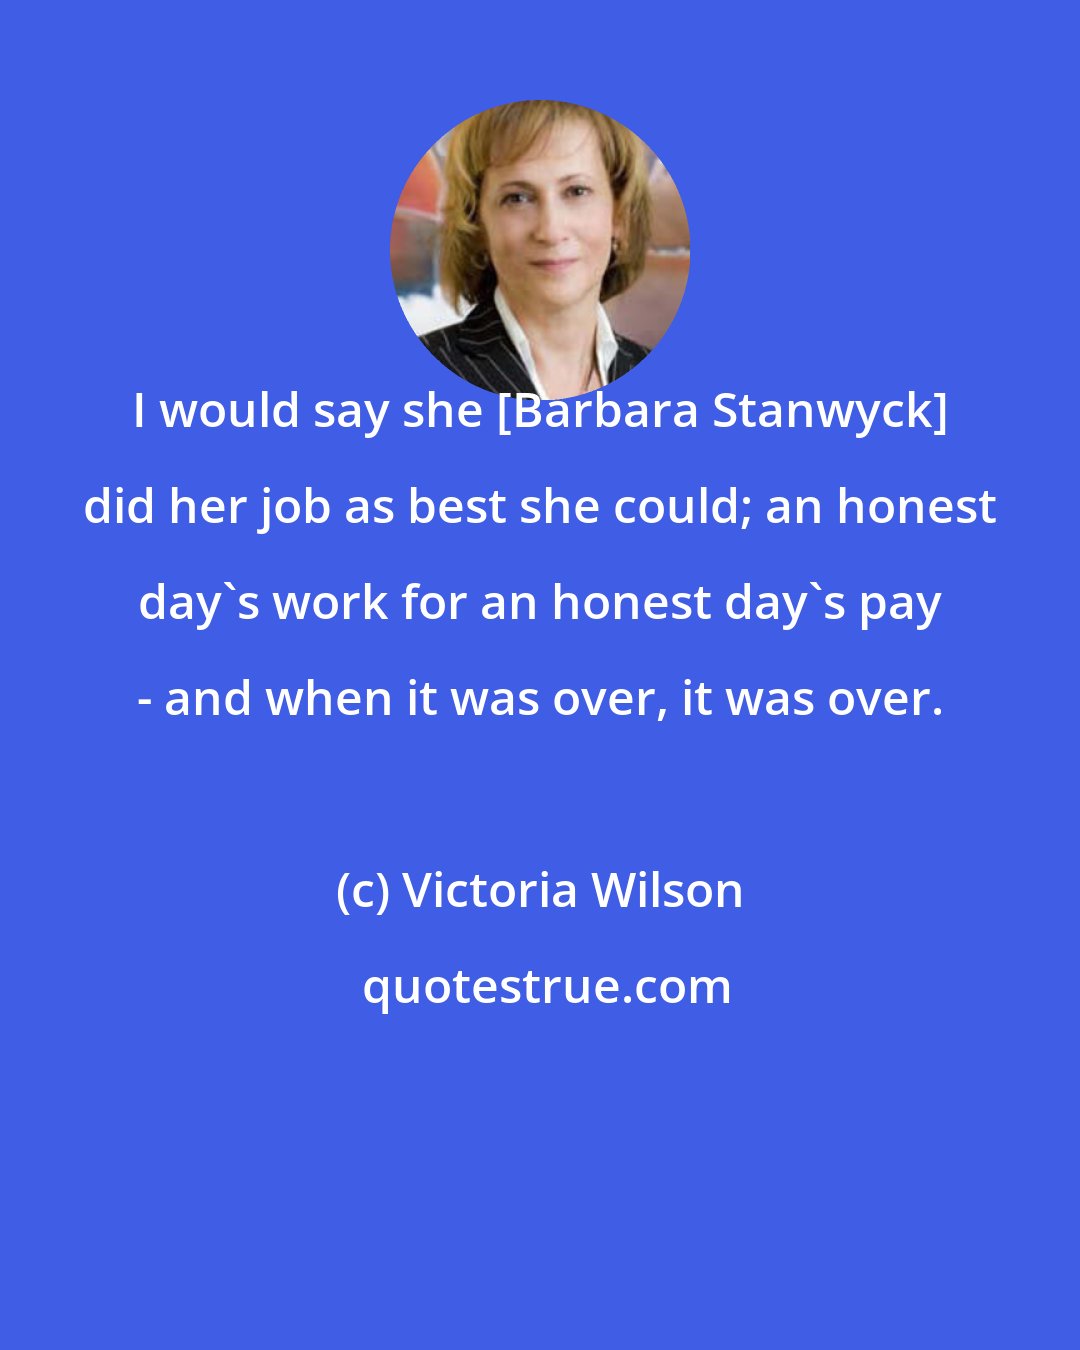 Victoria Wilson: I would say she [Barbara Stanwyck] did her job as best she could; an honest day's work for an honest day's pay - and when it was over, it was over.